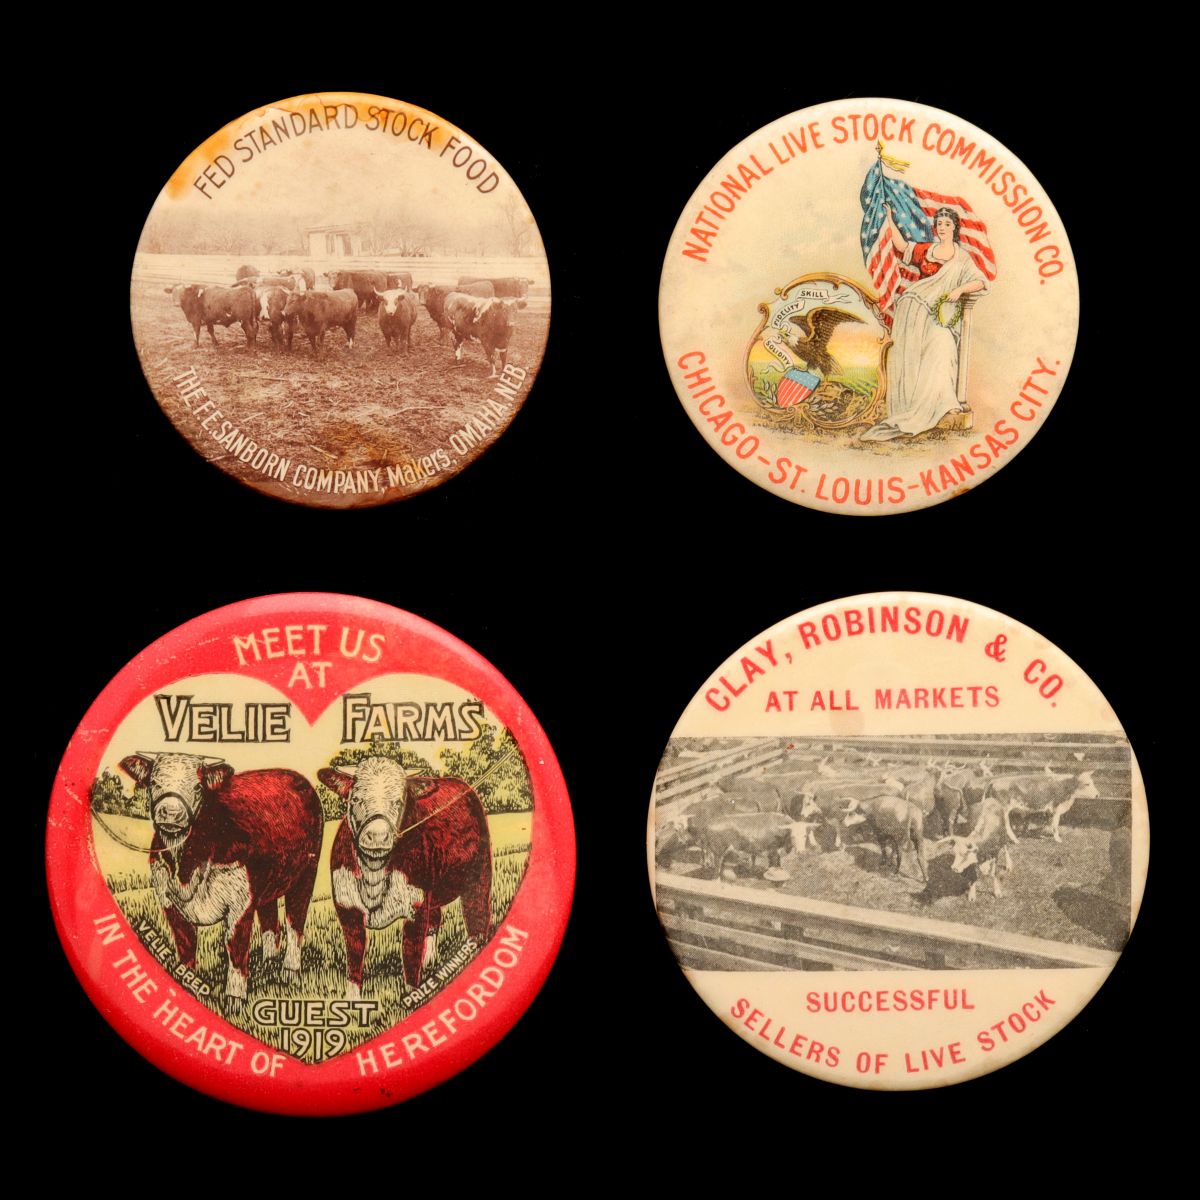 VELIE FARMS, STOCK FOOD & LIVESTOCK COMMISSION BUTTONS